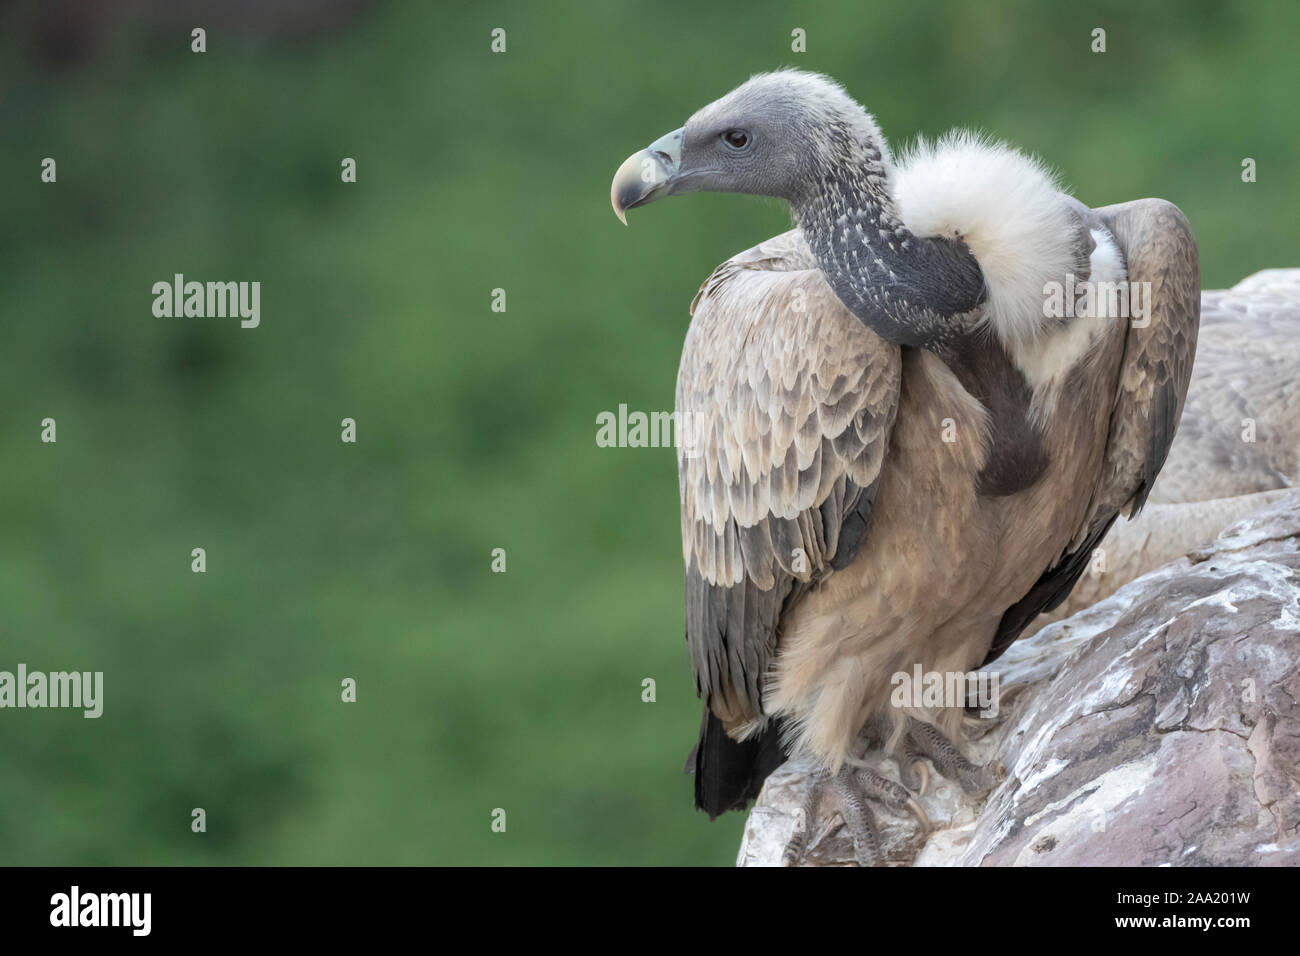 Indian vulture in natural habitats Stock Photo - Alamy